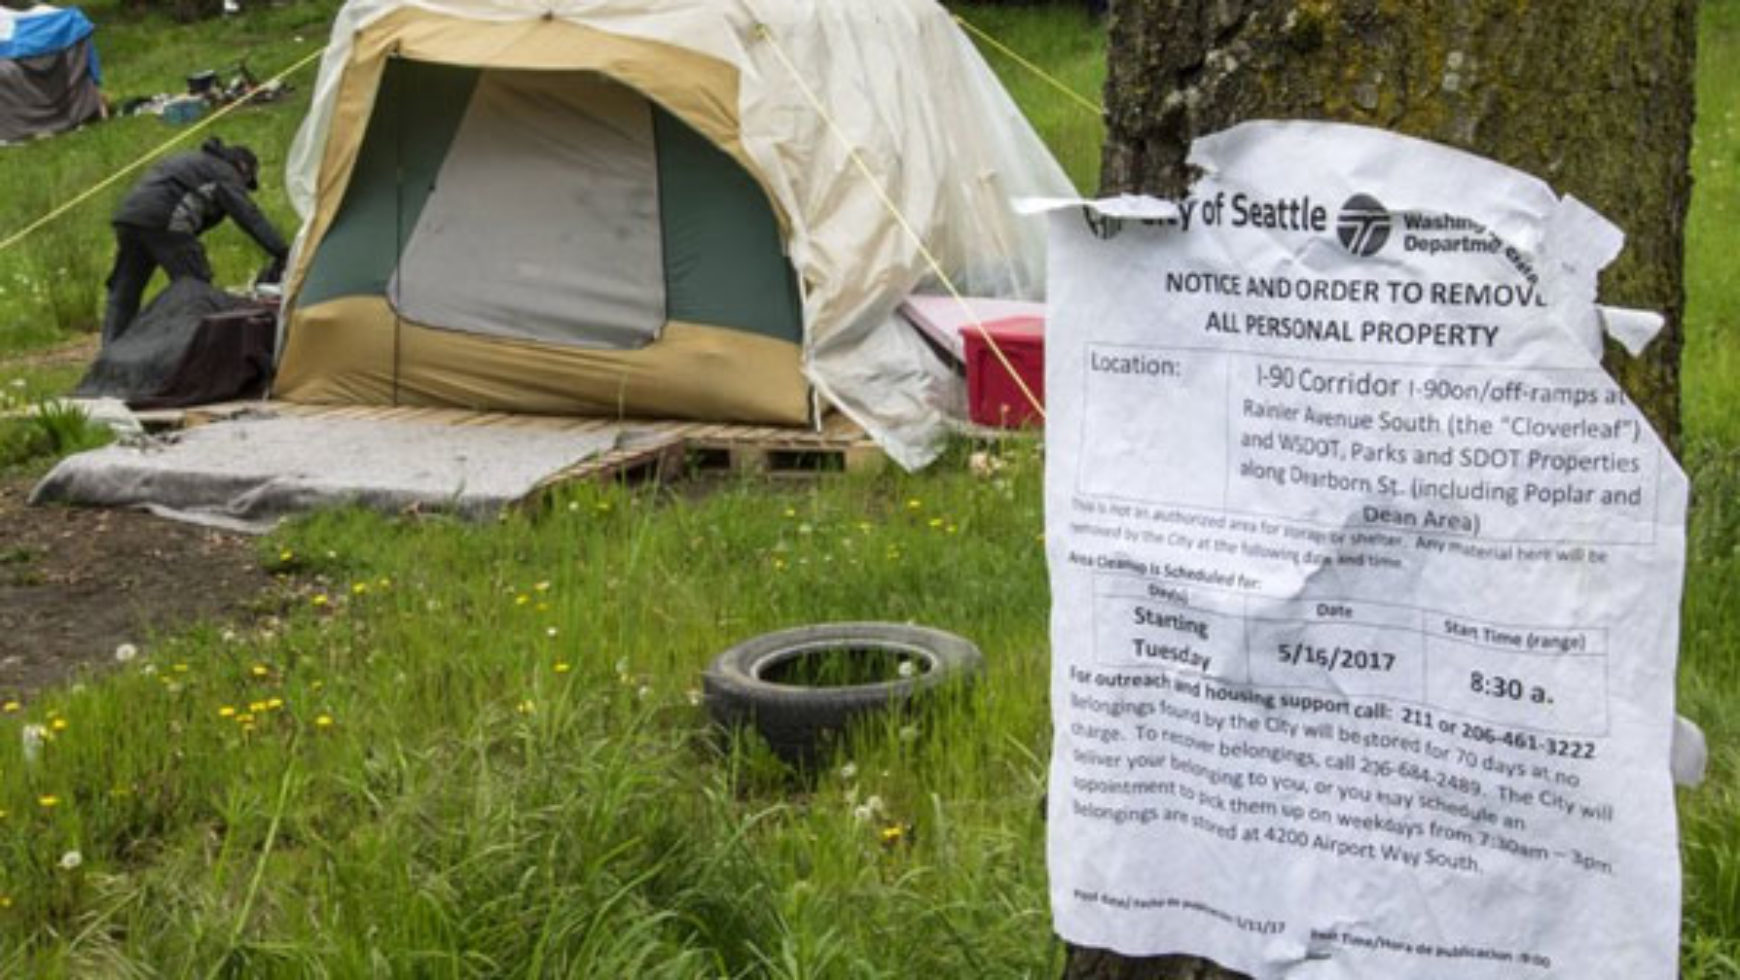 Seattle officials at odds on how many homeless get shelter after camps cleared